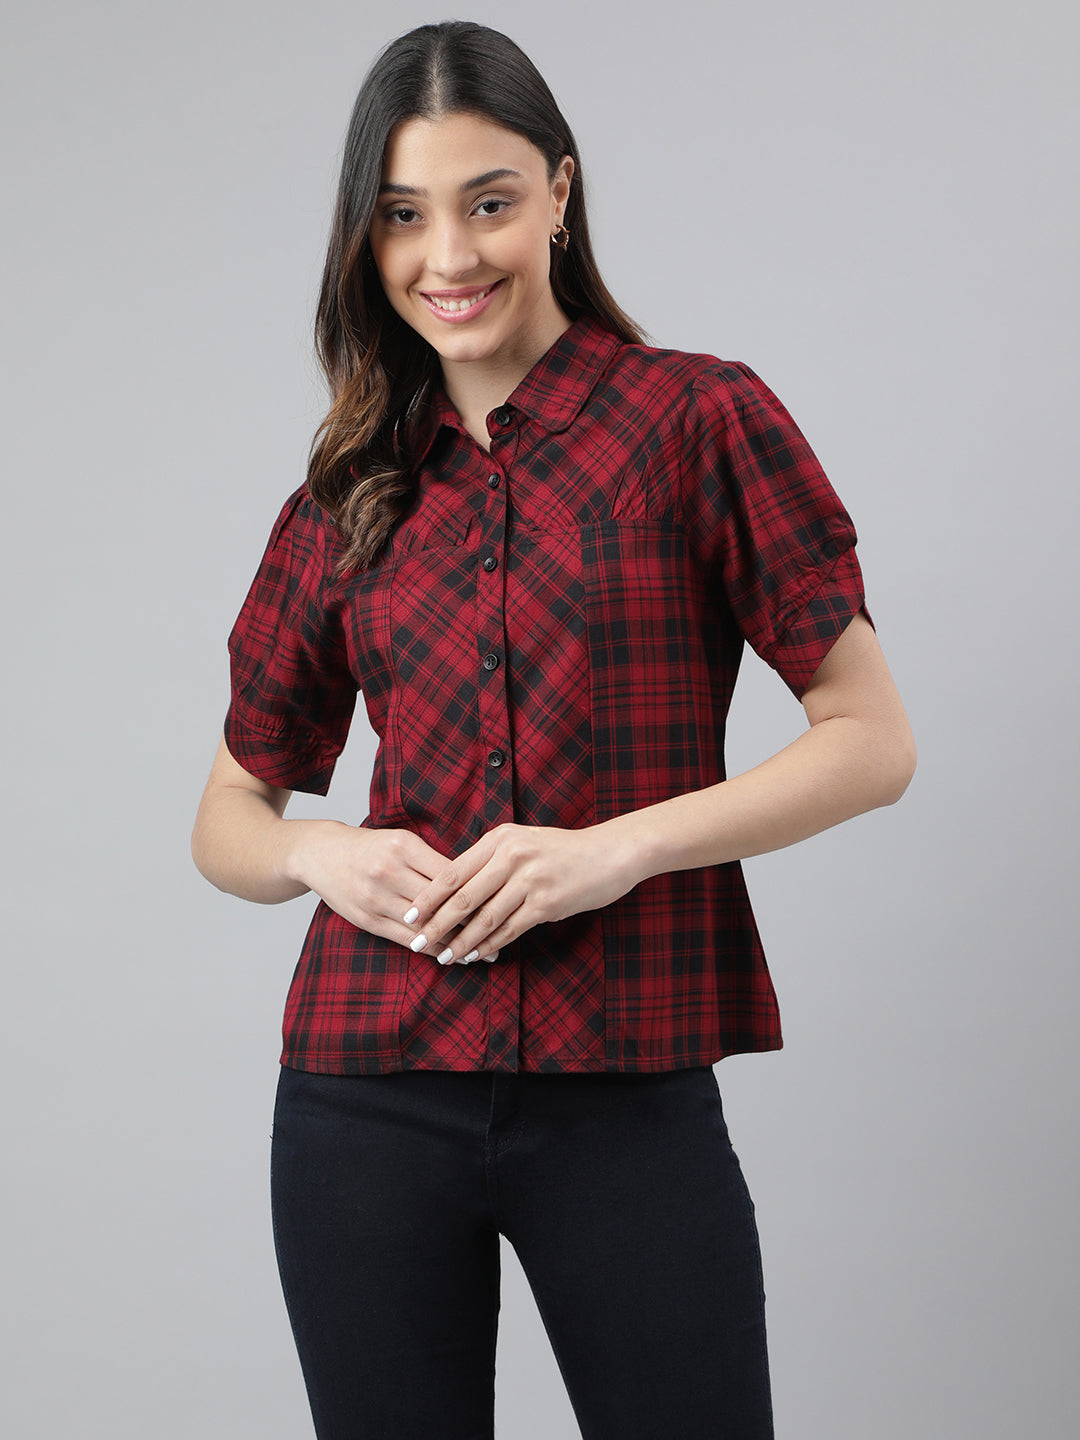 Maroon Half Sleeve Collar Neck Check Shirt Women Blouse Top for Casual